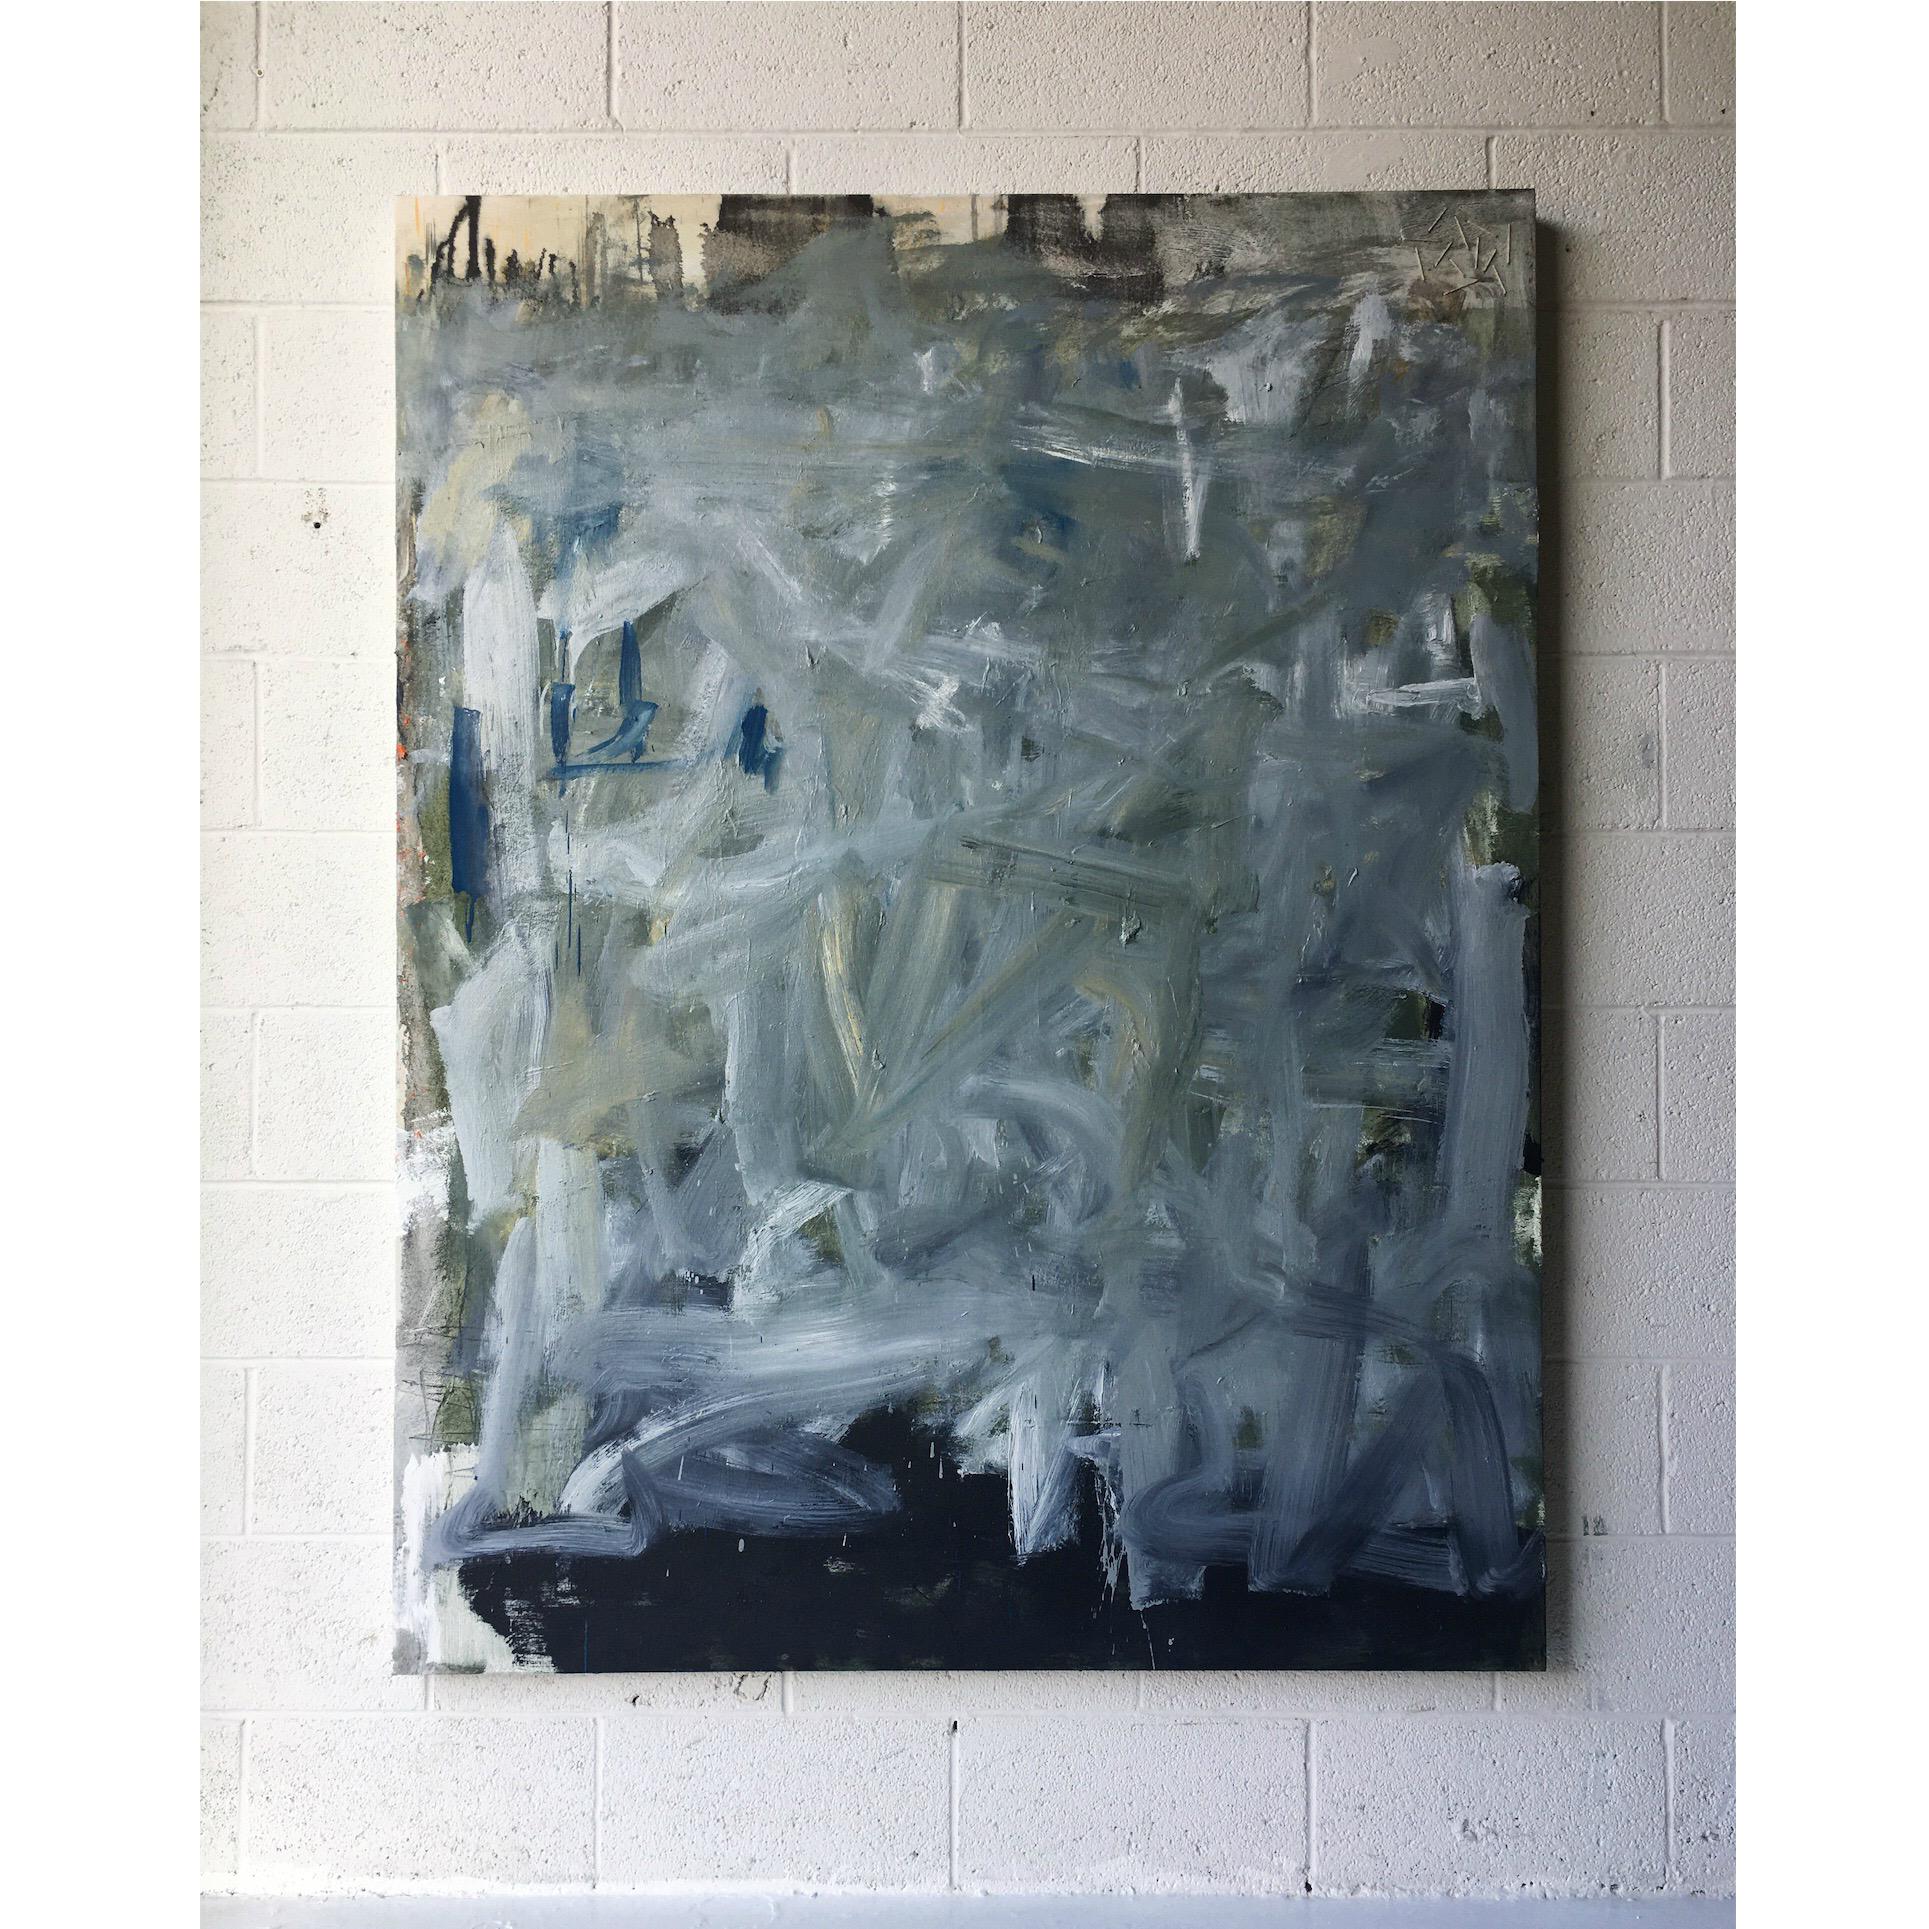 Oil + cotton string on canvas

Colt Seager is an internationally recognized artist who resides in the suburbs of Chicago. Working primarily in the mediums of painting and sculpture, his art seeks to invite others into a holy space, encouraging